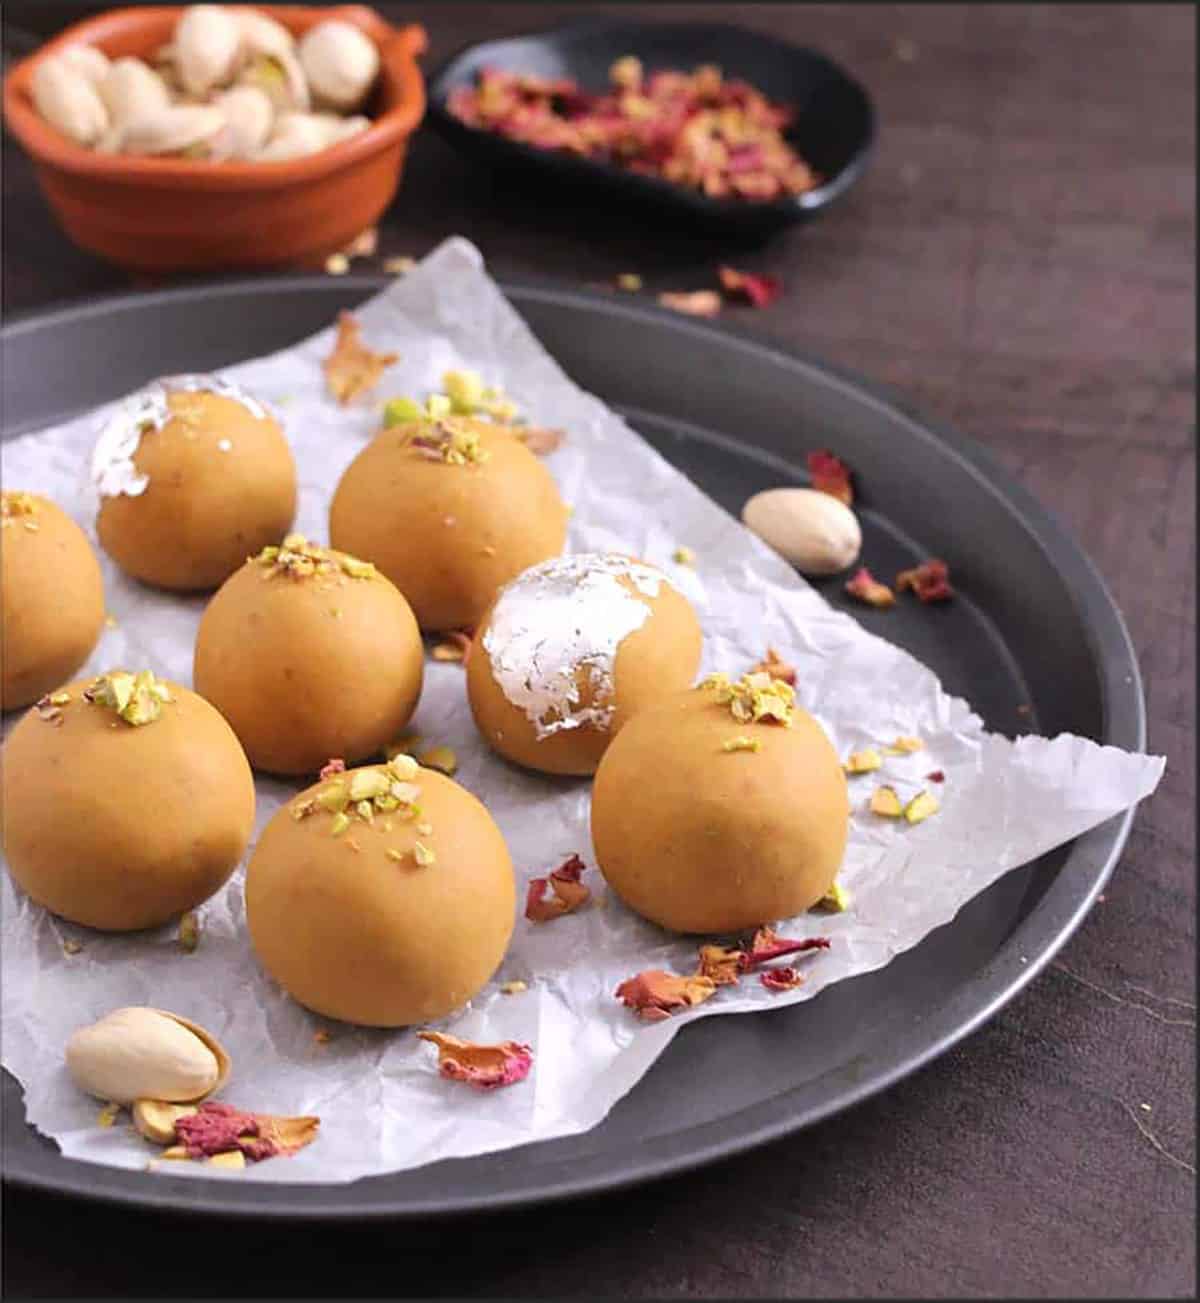 Besan Ladoo garnished with rose petals, silver vark. and crushed pistachios.